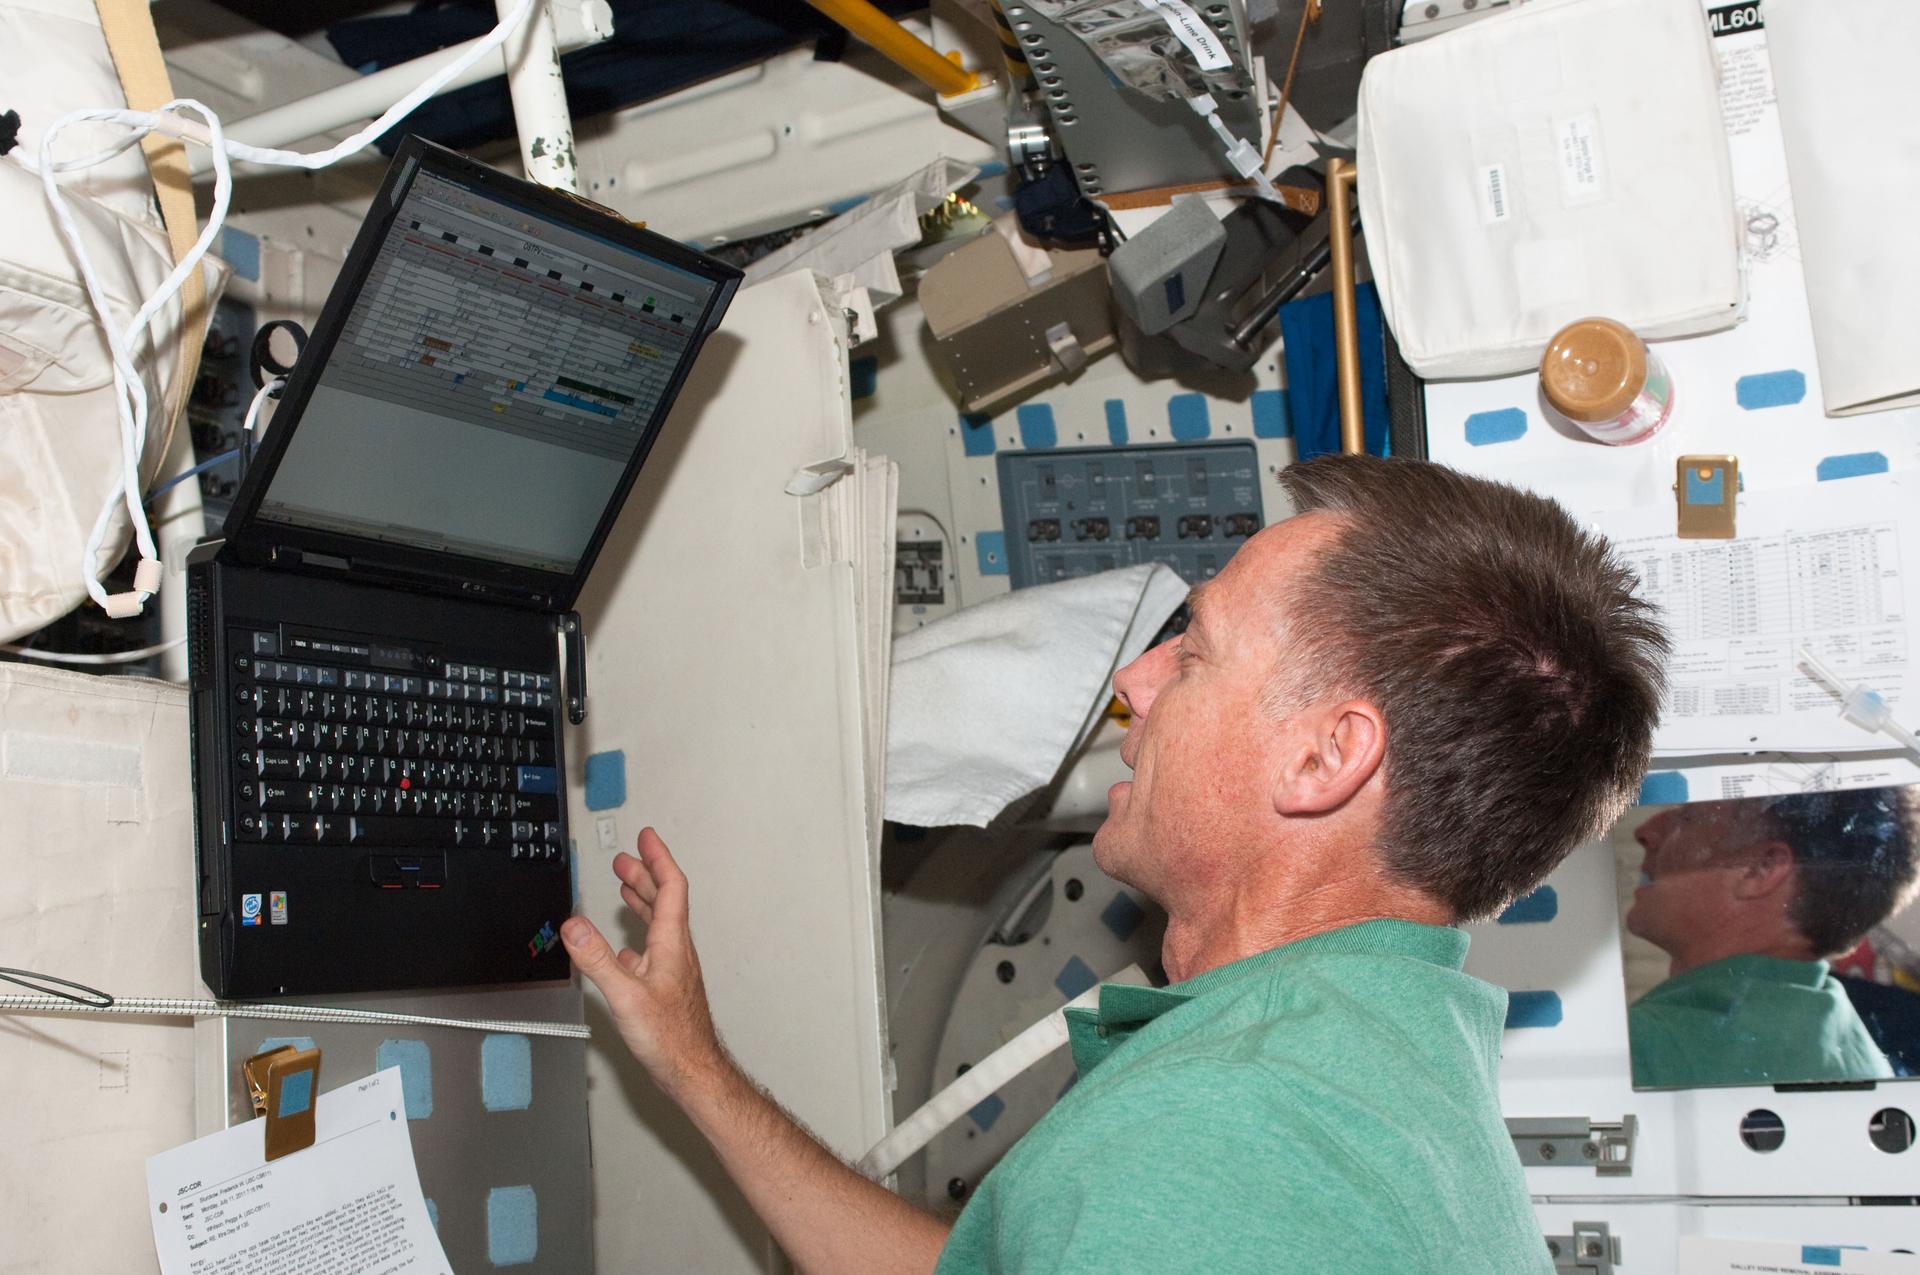 NASA astronaut Chris Ferguson, STS-135 commander, inputs data on a computer on Atlantis’ middeck on July 13, 2011, during the sixth day in space for him and three crewmates.